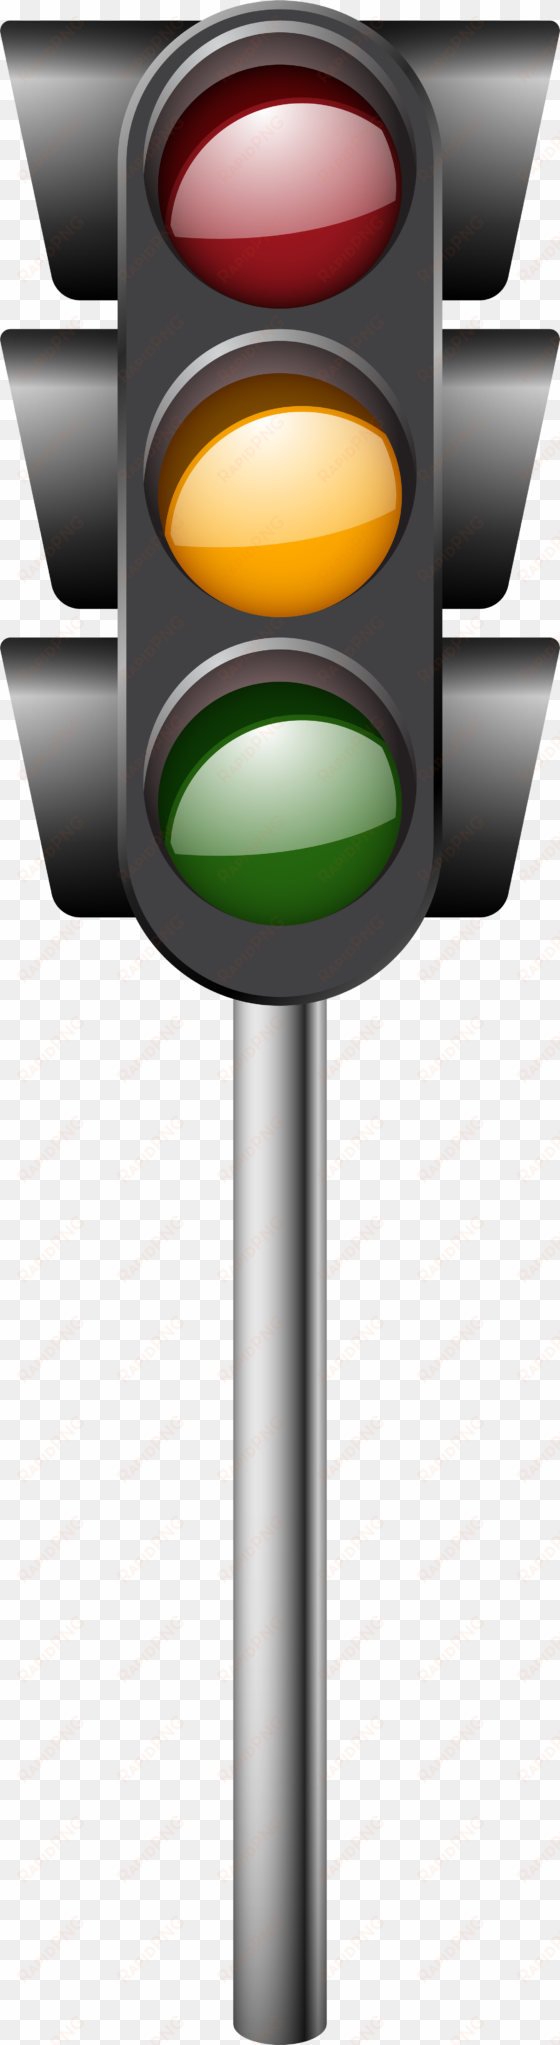 traffic light png clipart - traffic light text graphic